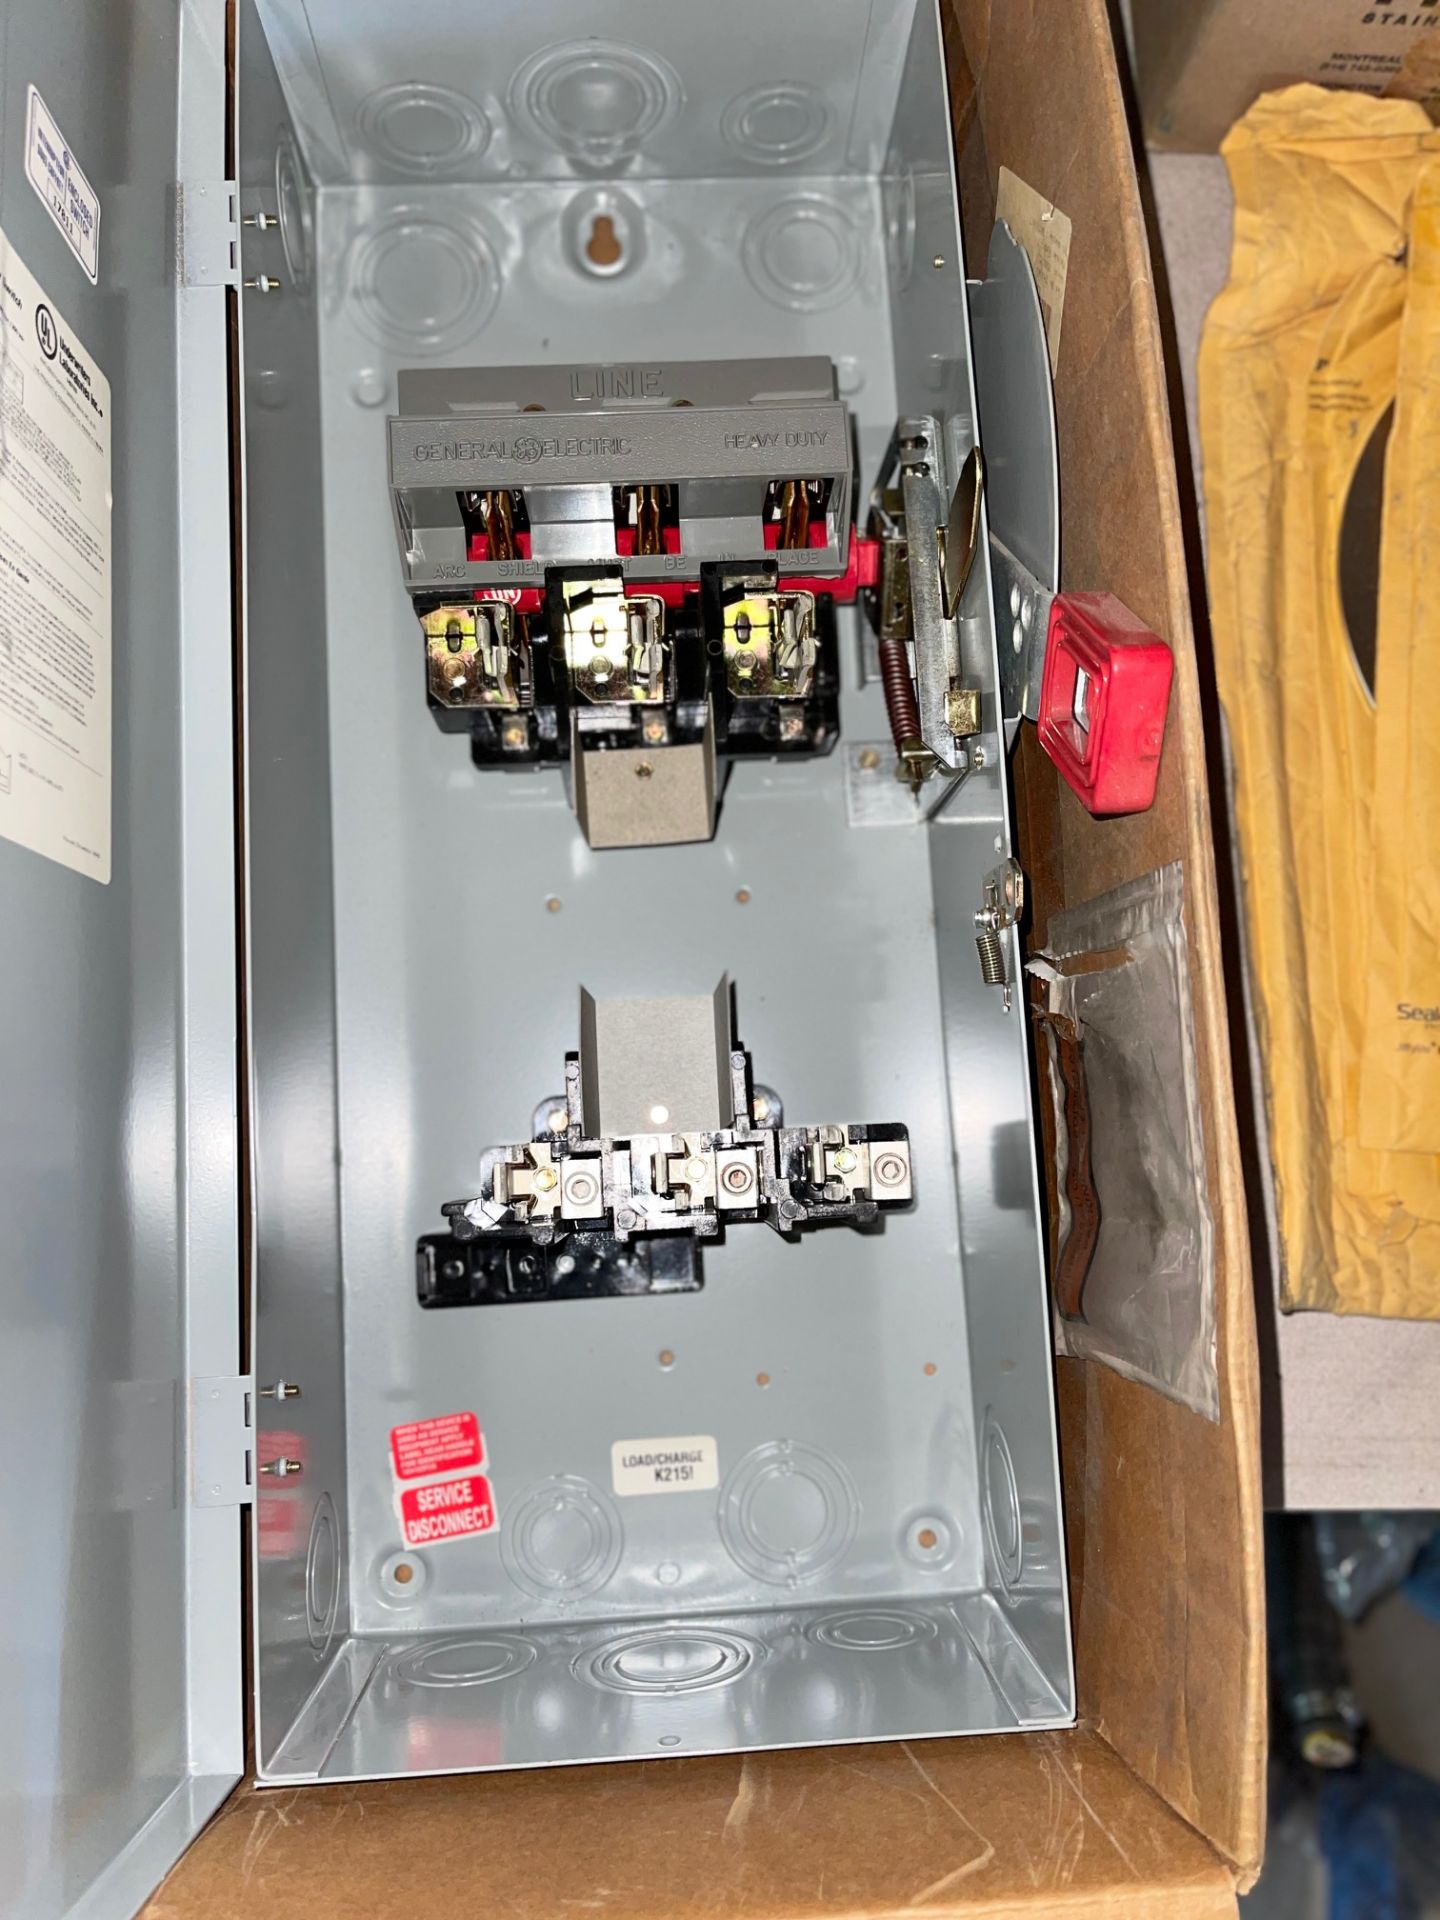 GE 100 AMP FUSE DISCONNECT, 23” X 9” X 5” - Image 2 of 4